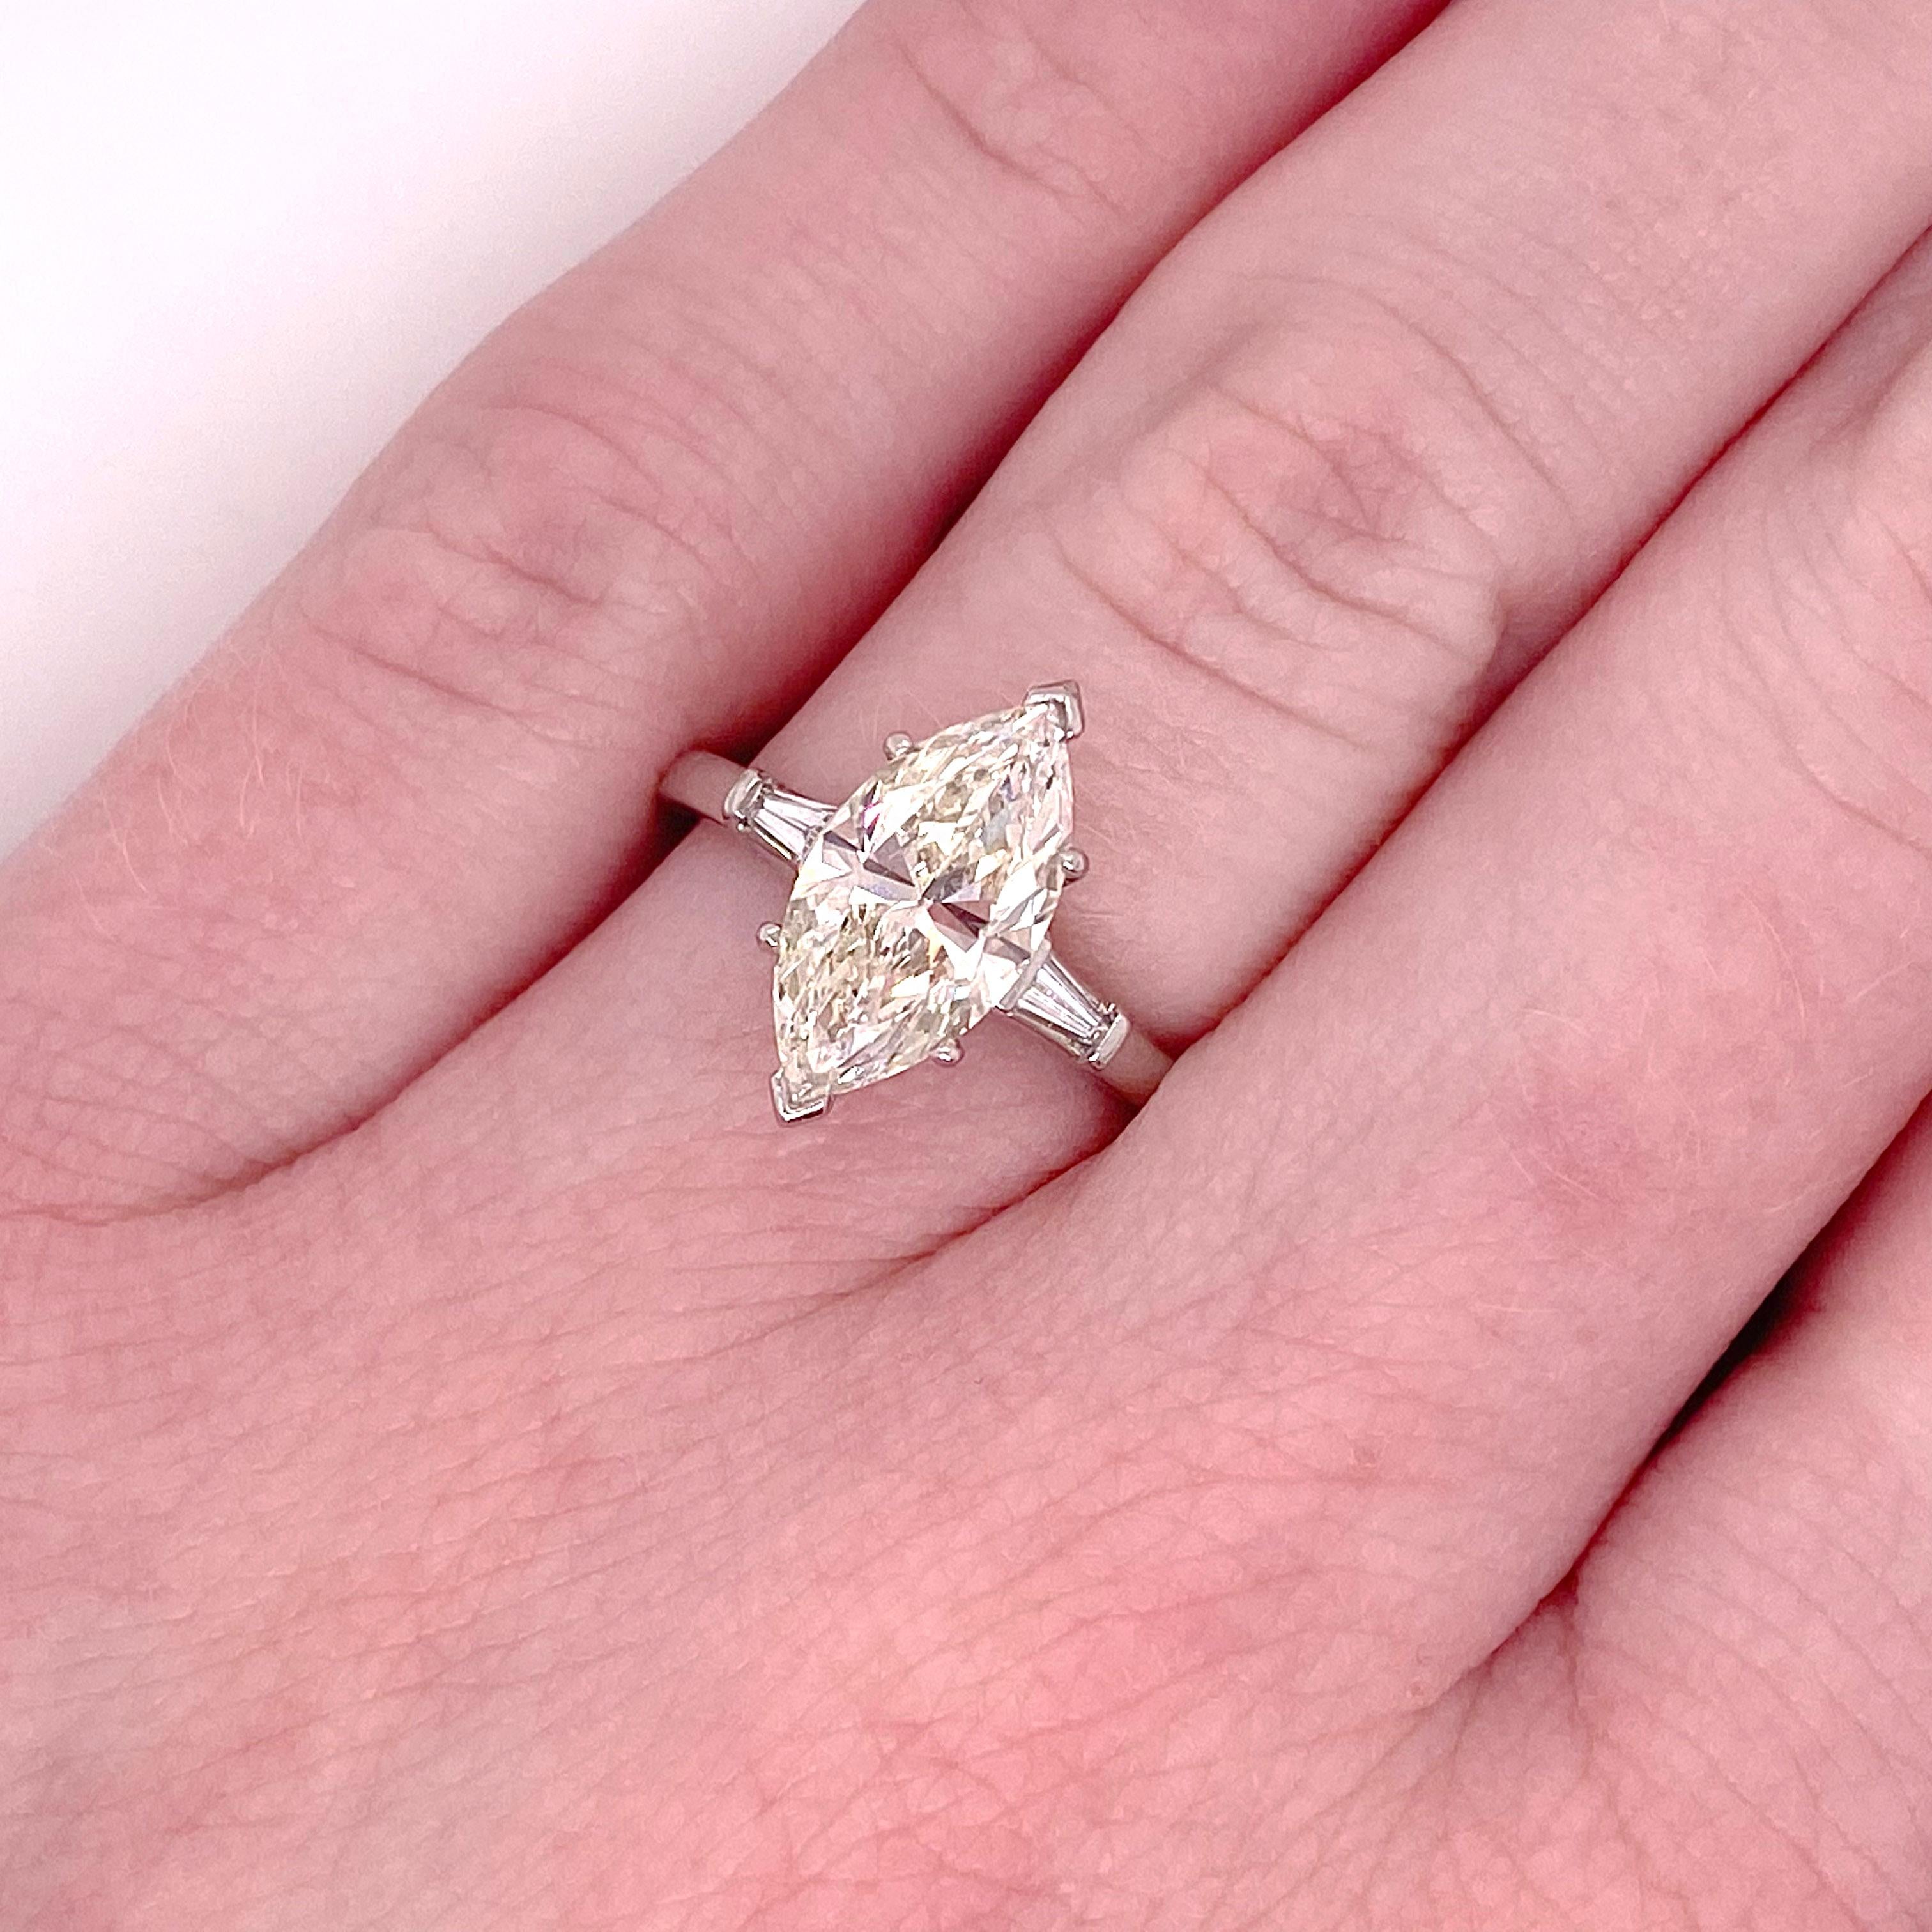 This 2.50 carat marquise diamond is stunning in this three stone ring! The baguette diamonds are great accents to this gorgeous marquise diamond.  The low profile of this ring is great if you want the ring to work with gloves or be practical for